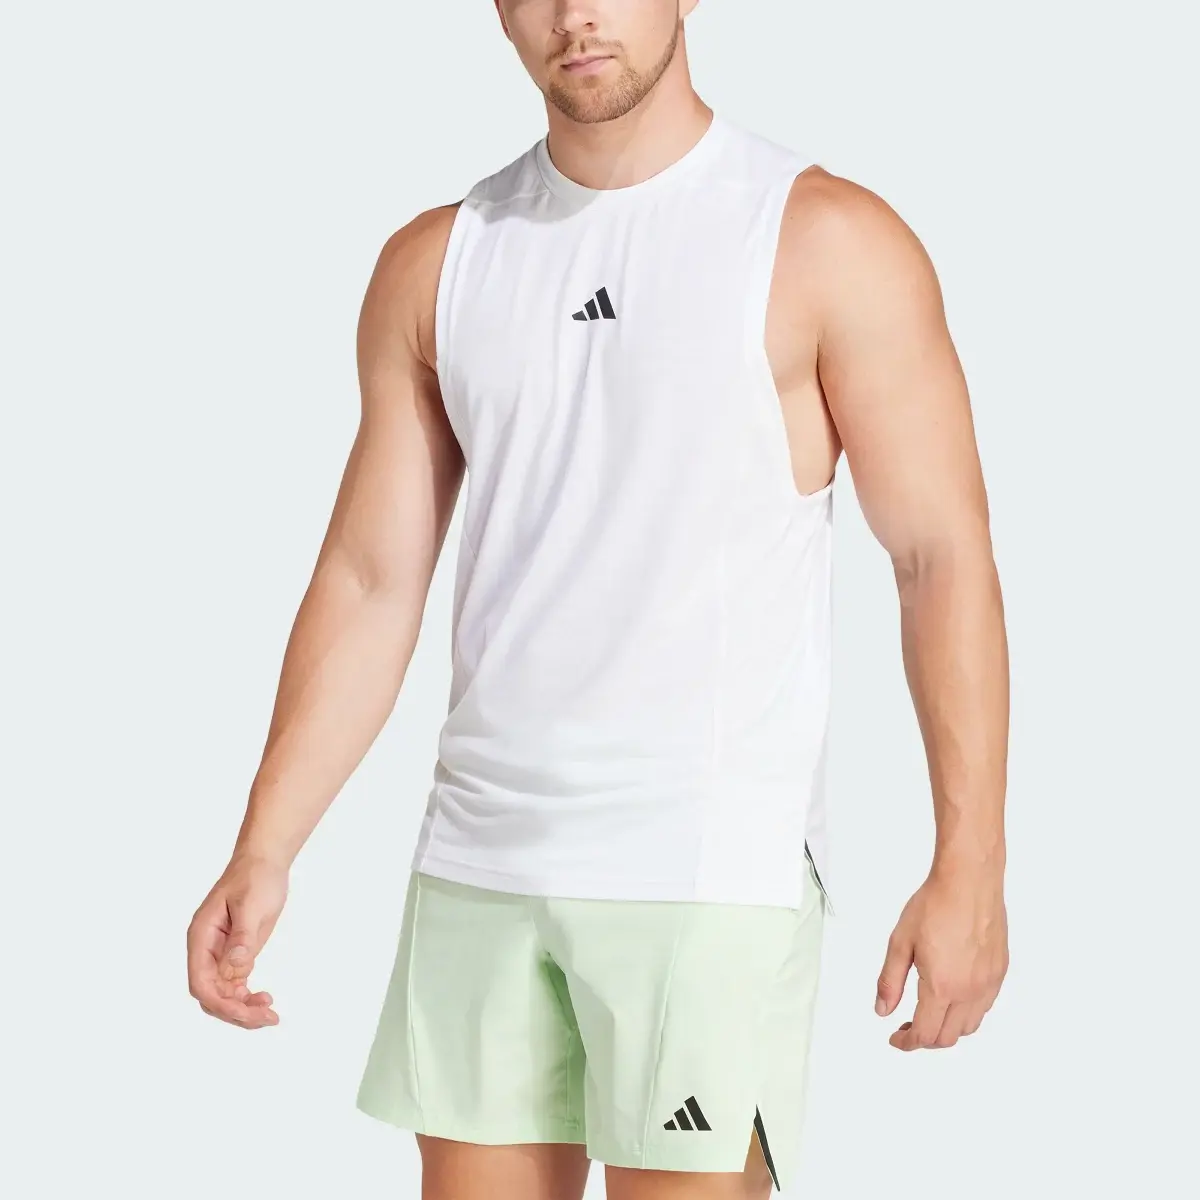 Adidas Designed for Training Workout Tank Top. 1